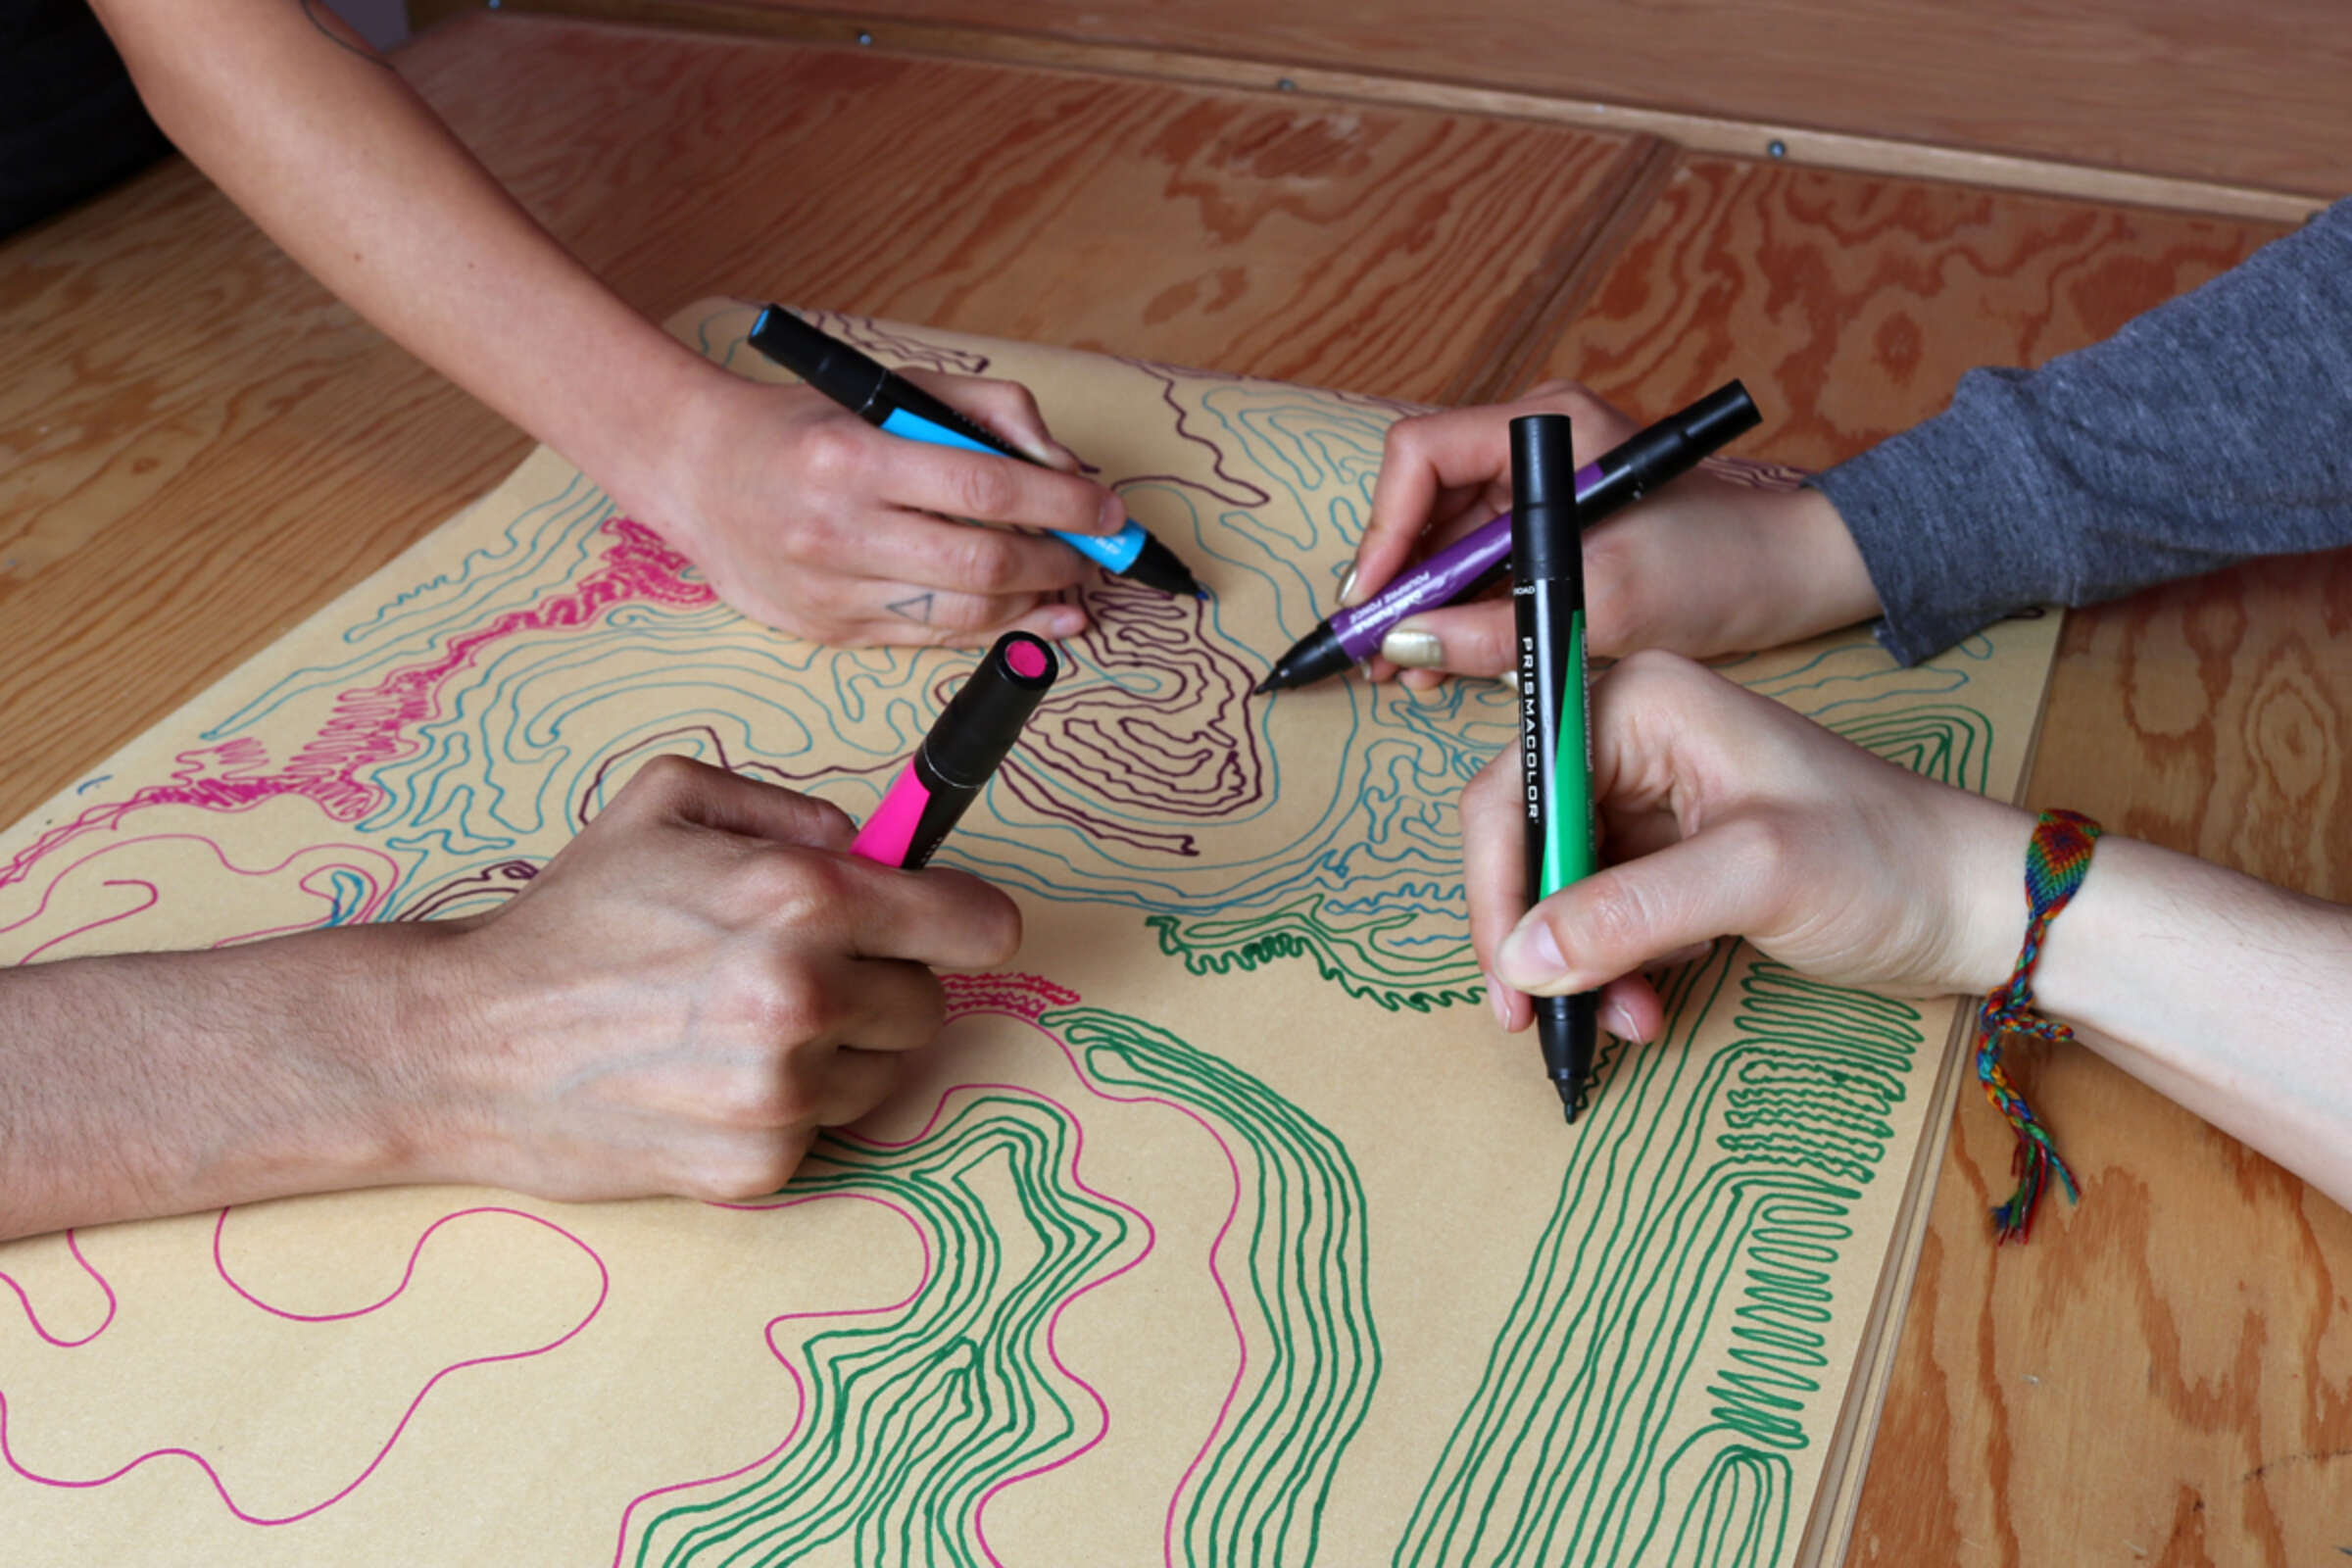 Four hands are collaboratively drawing on a large piece of paper with colorful markers on a wooden table. The paper displays various colorful lines and patterns. The hands are of diverse individuals, with varying skin tones and accessories.